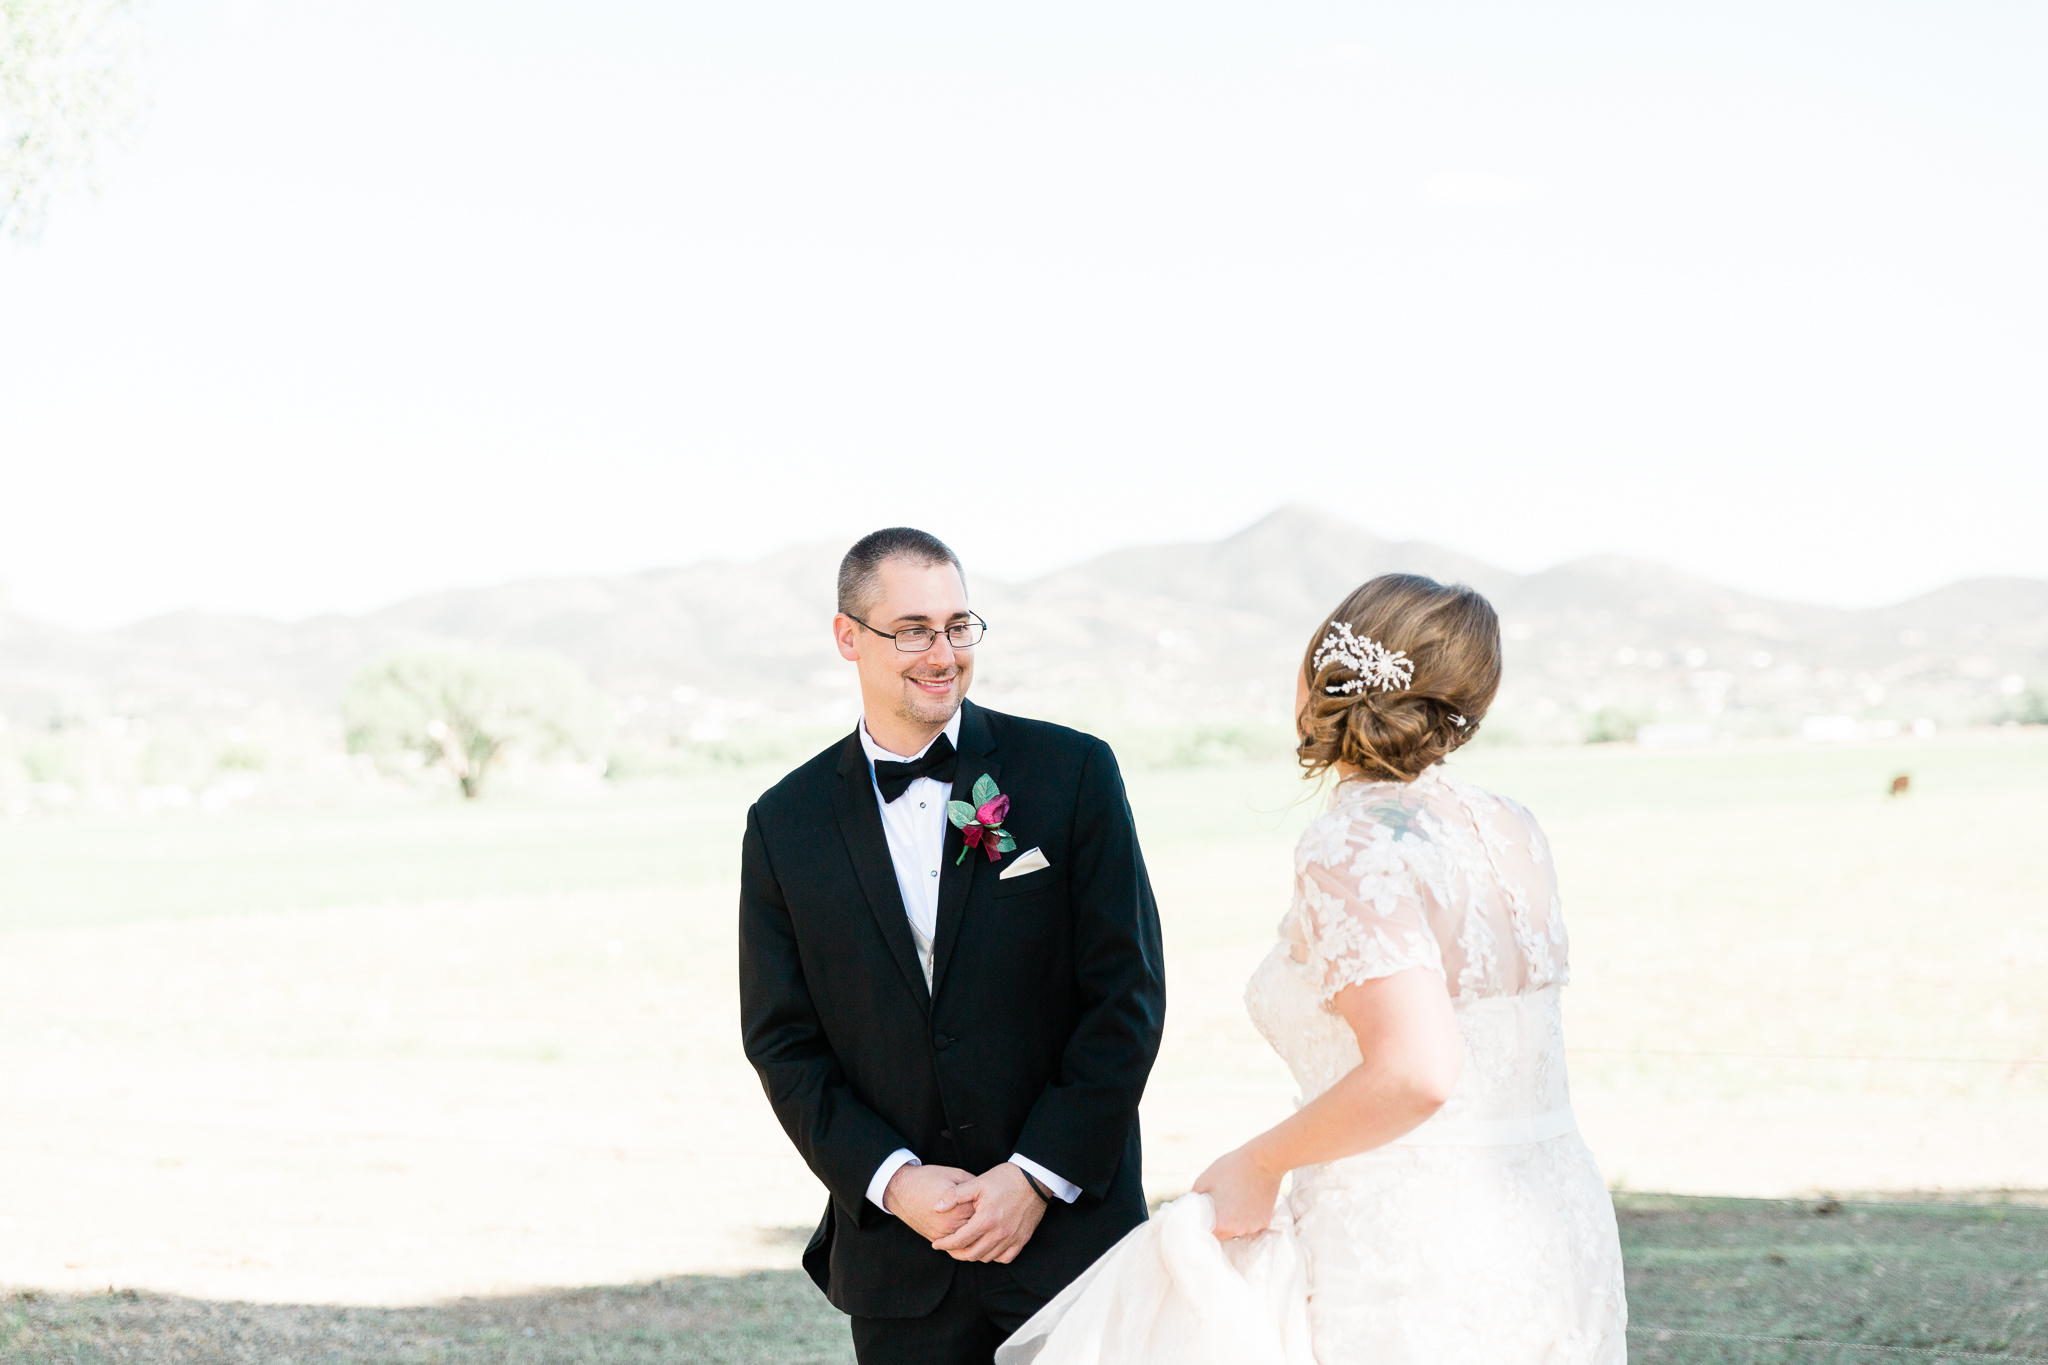 The groom in the black tux has turned around to see his bride in her ivory gown. He has a smile on his face, and her body language is elated. Location is Mortimer Farms, Prescott, Arizona